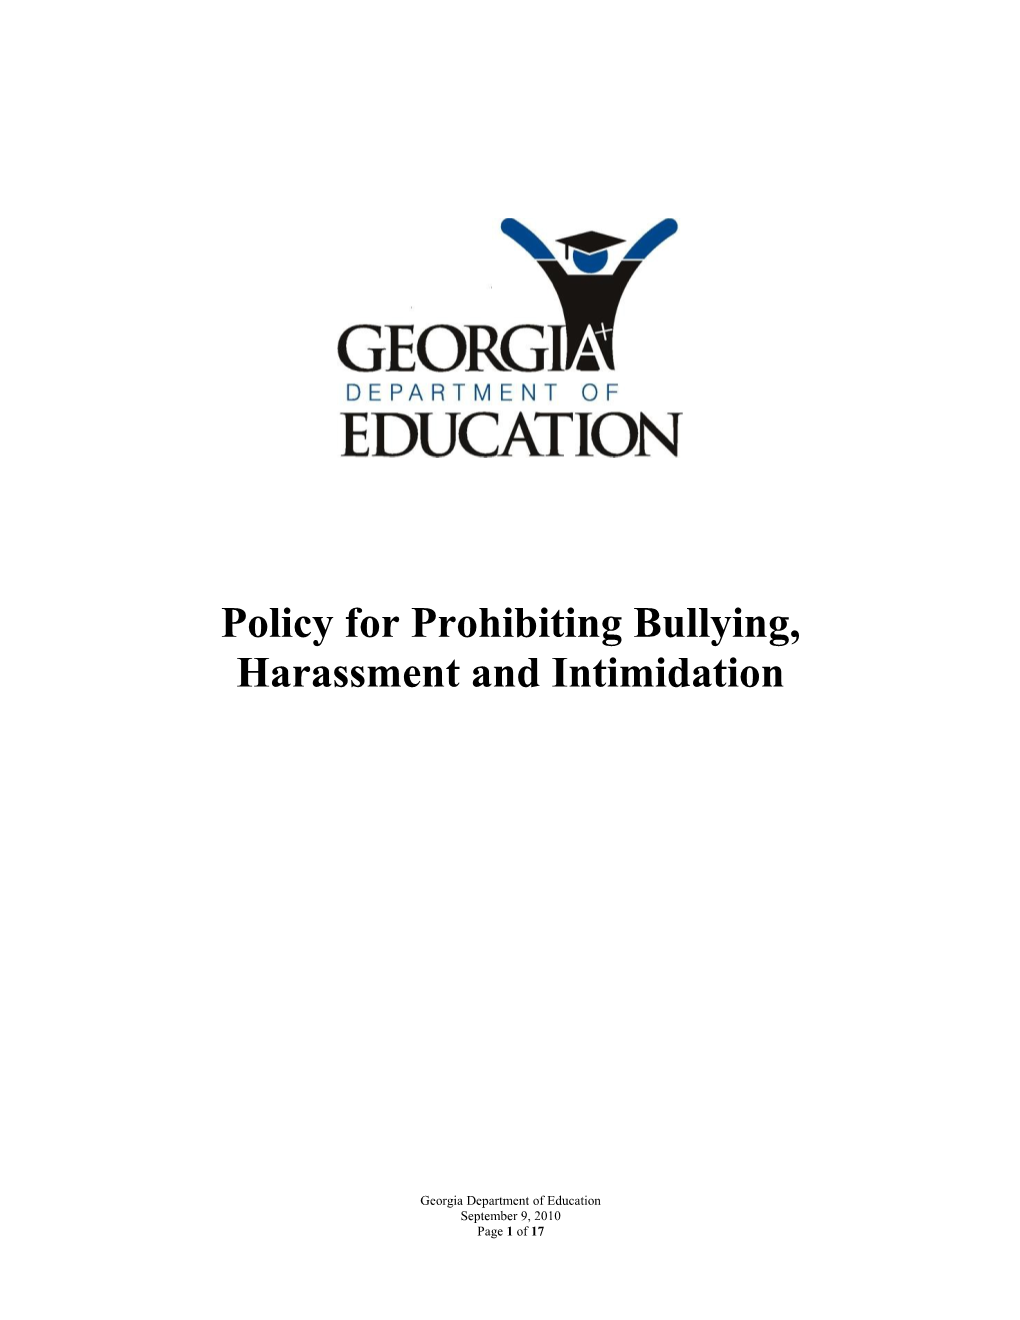 Policy for Prohibiting Bullying, Harassment and Intimidation